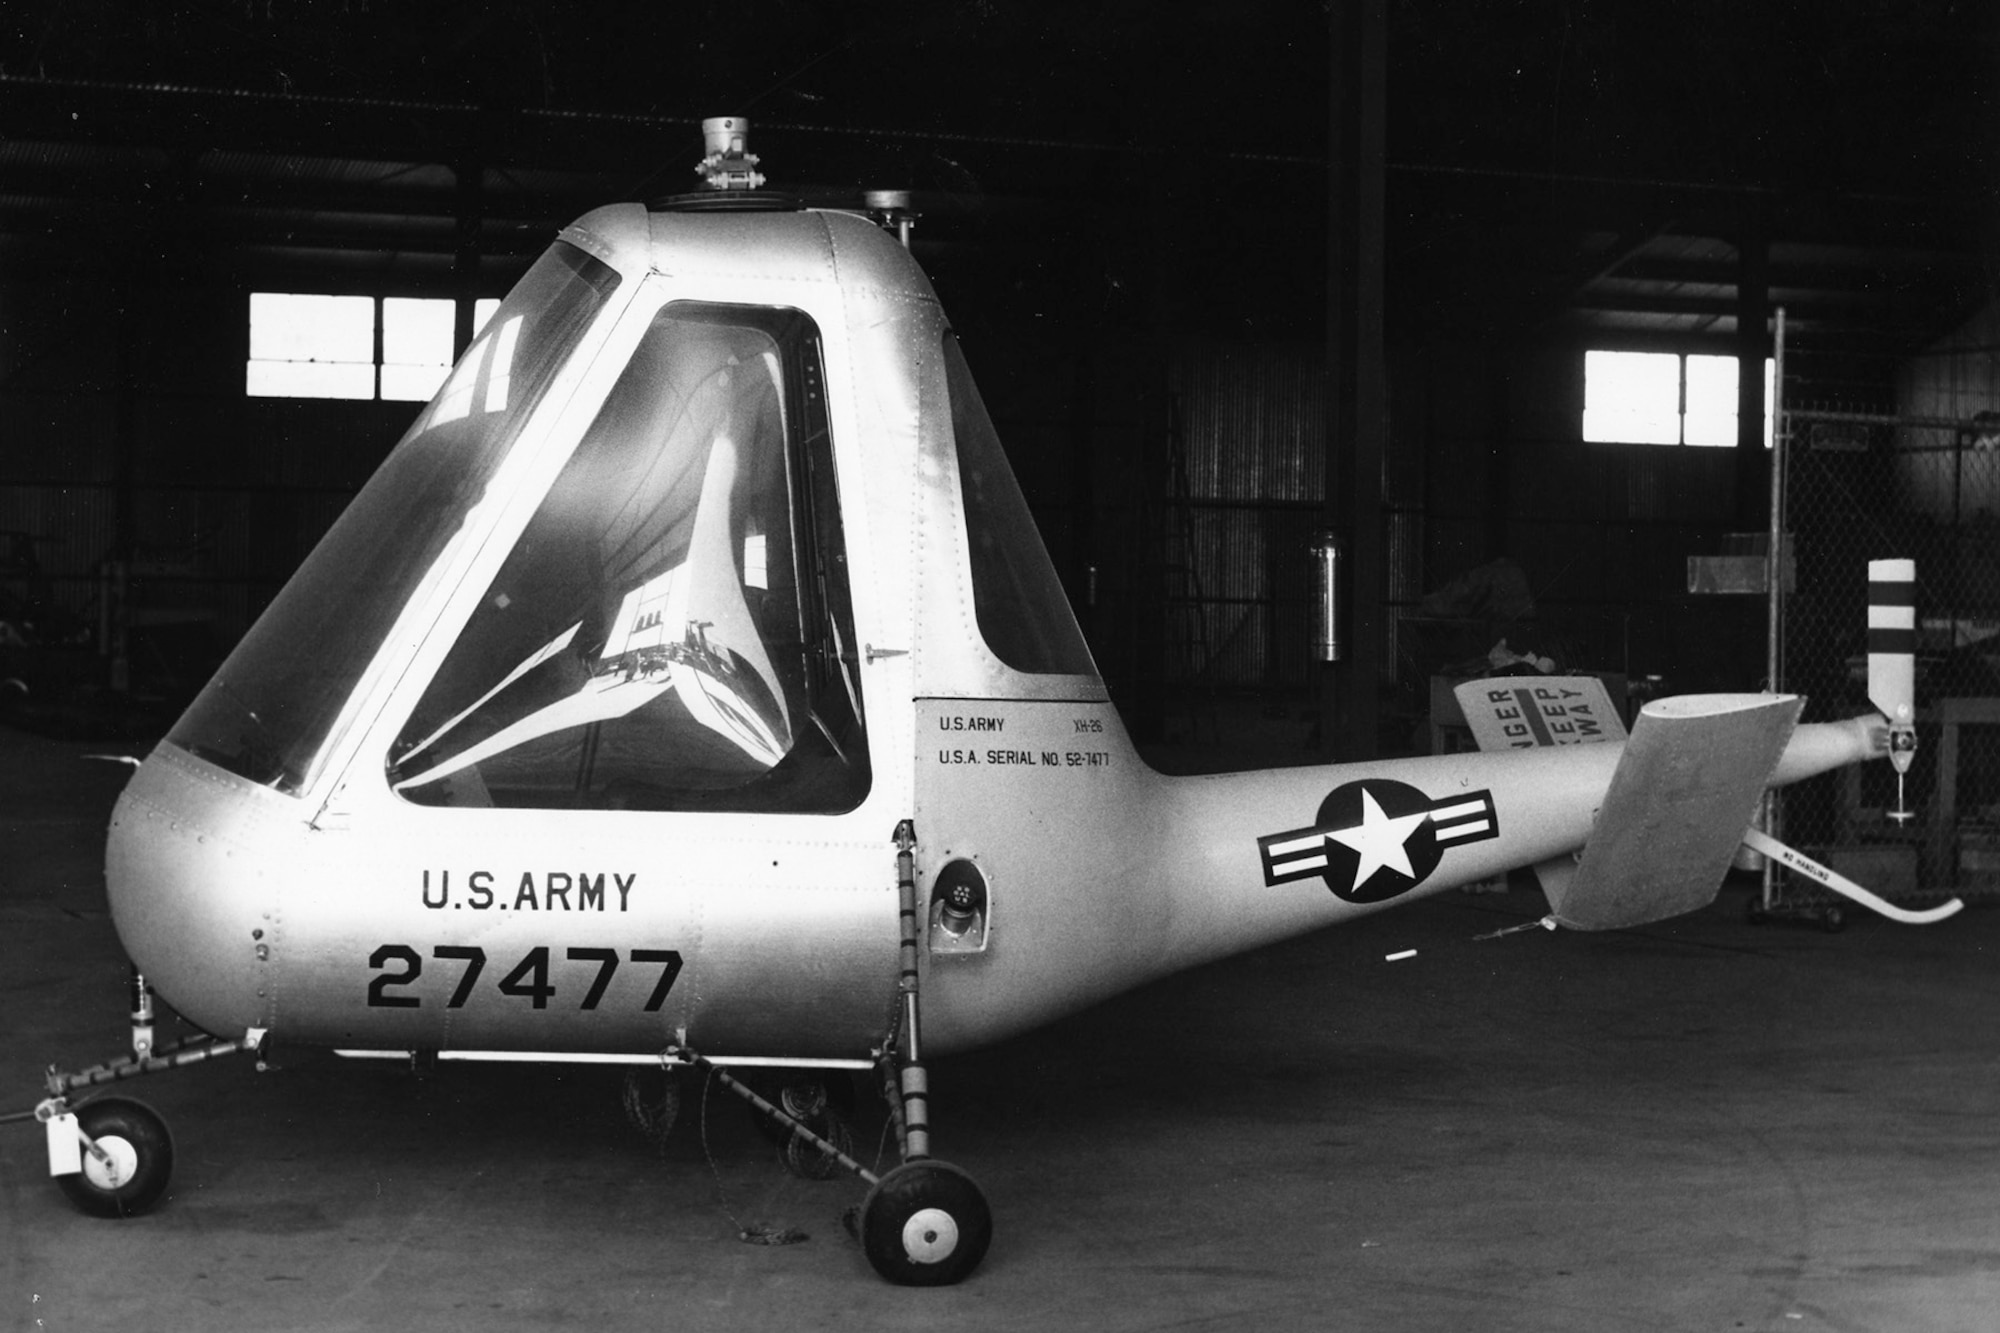 This is one of five XH-26 prototypes. The pulsejets produced no torque like engines on other helicopters -- the tiny, belt-driven tail rotor was not used to counter torque, but to improve directional control. (U.S. Air Force photo)